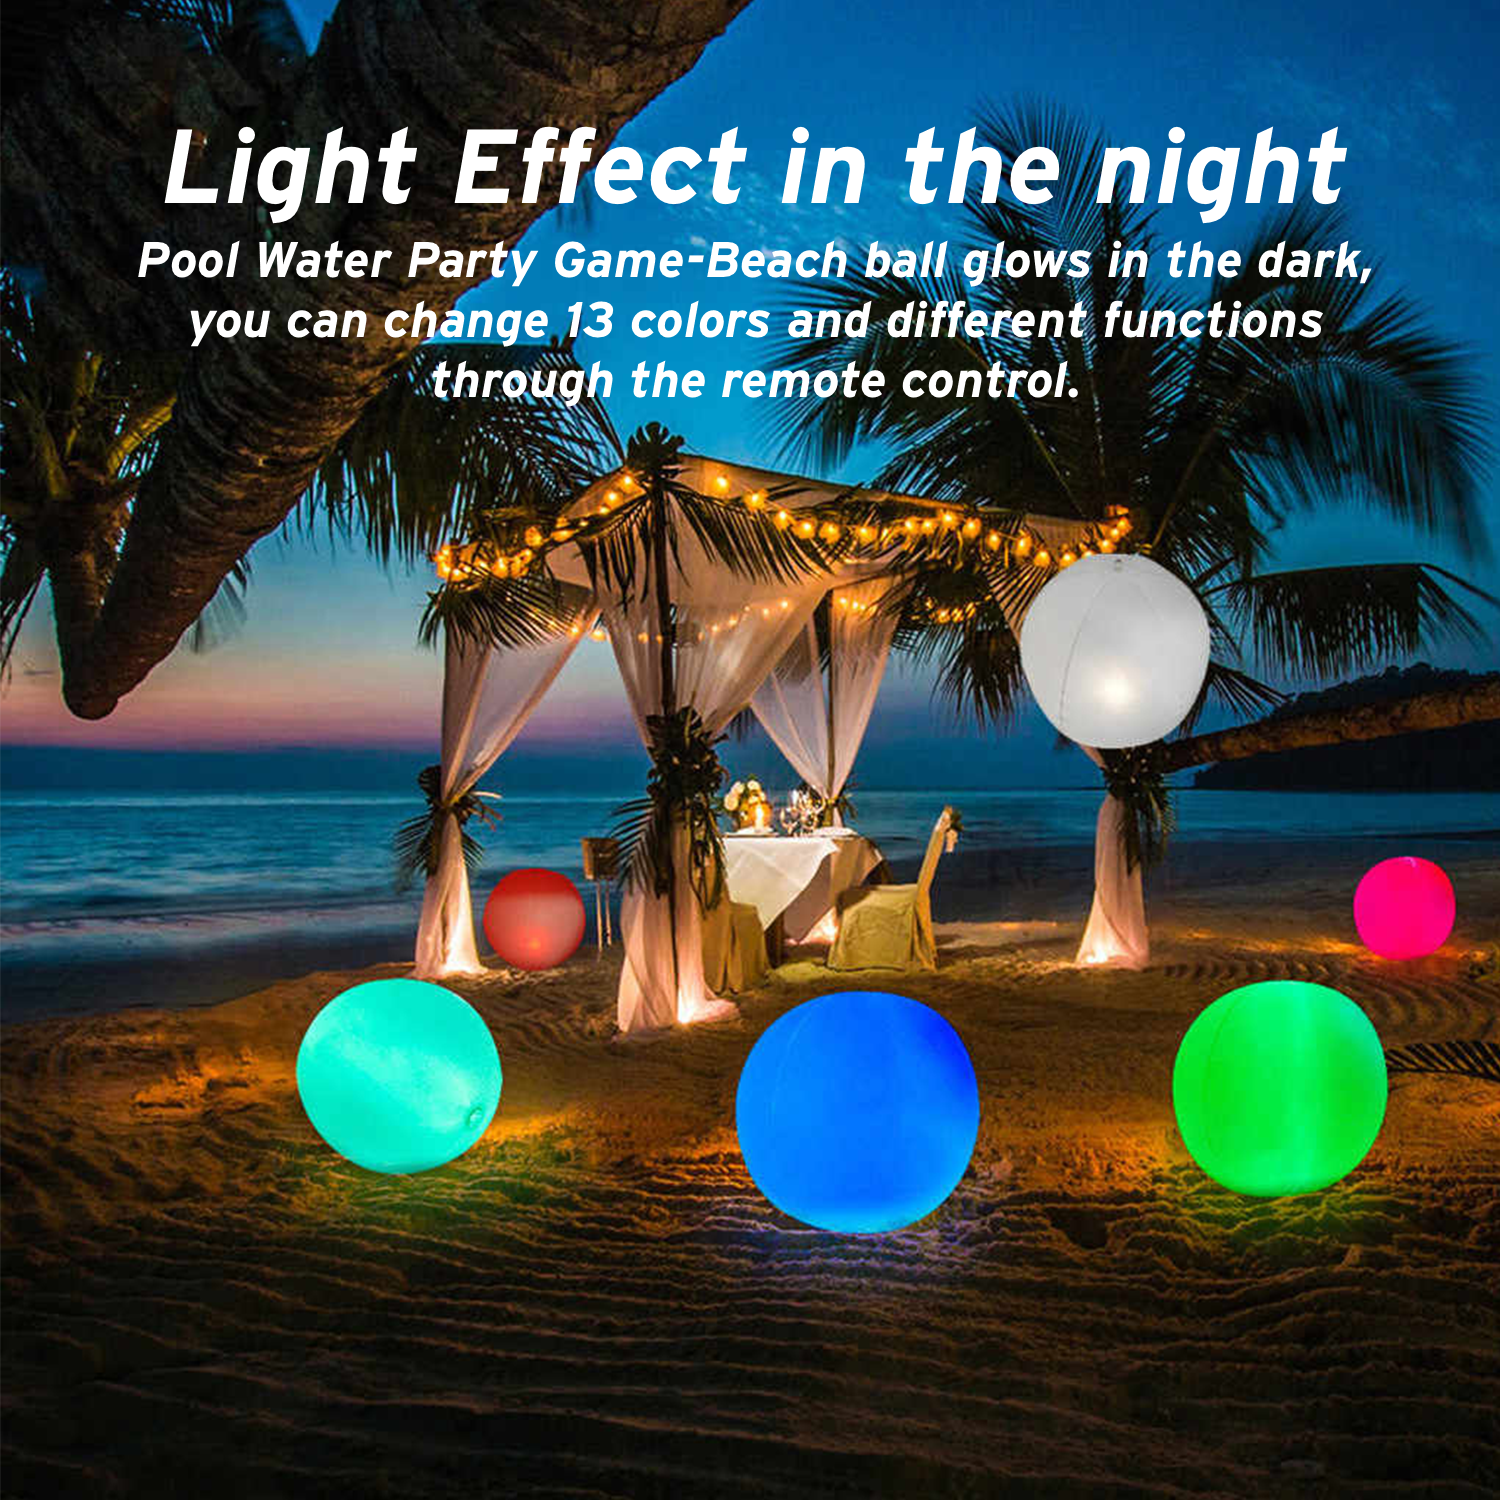 4 Lights Anonion 2 Pack 16 Glow Beach Ball 13 Colors Changing LED Light Up Floating Inflatable Pool Toys with Remote Glow in The Dark Home Patio Garden Swimming Party Outdoor Games Decorations